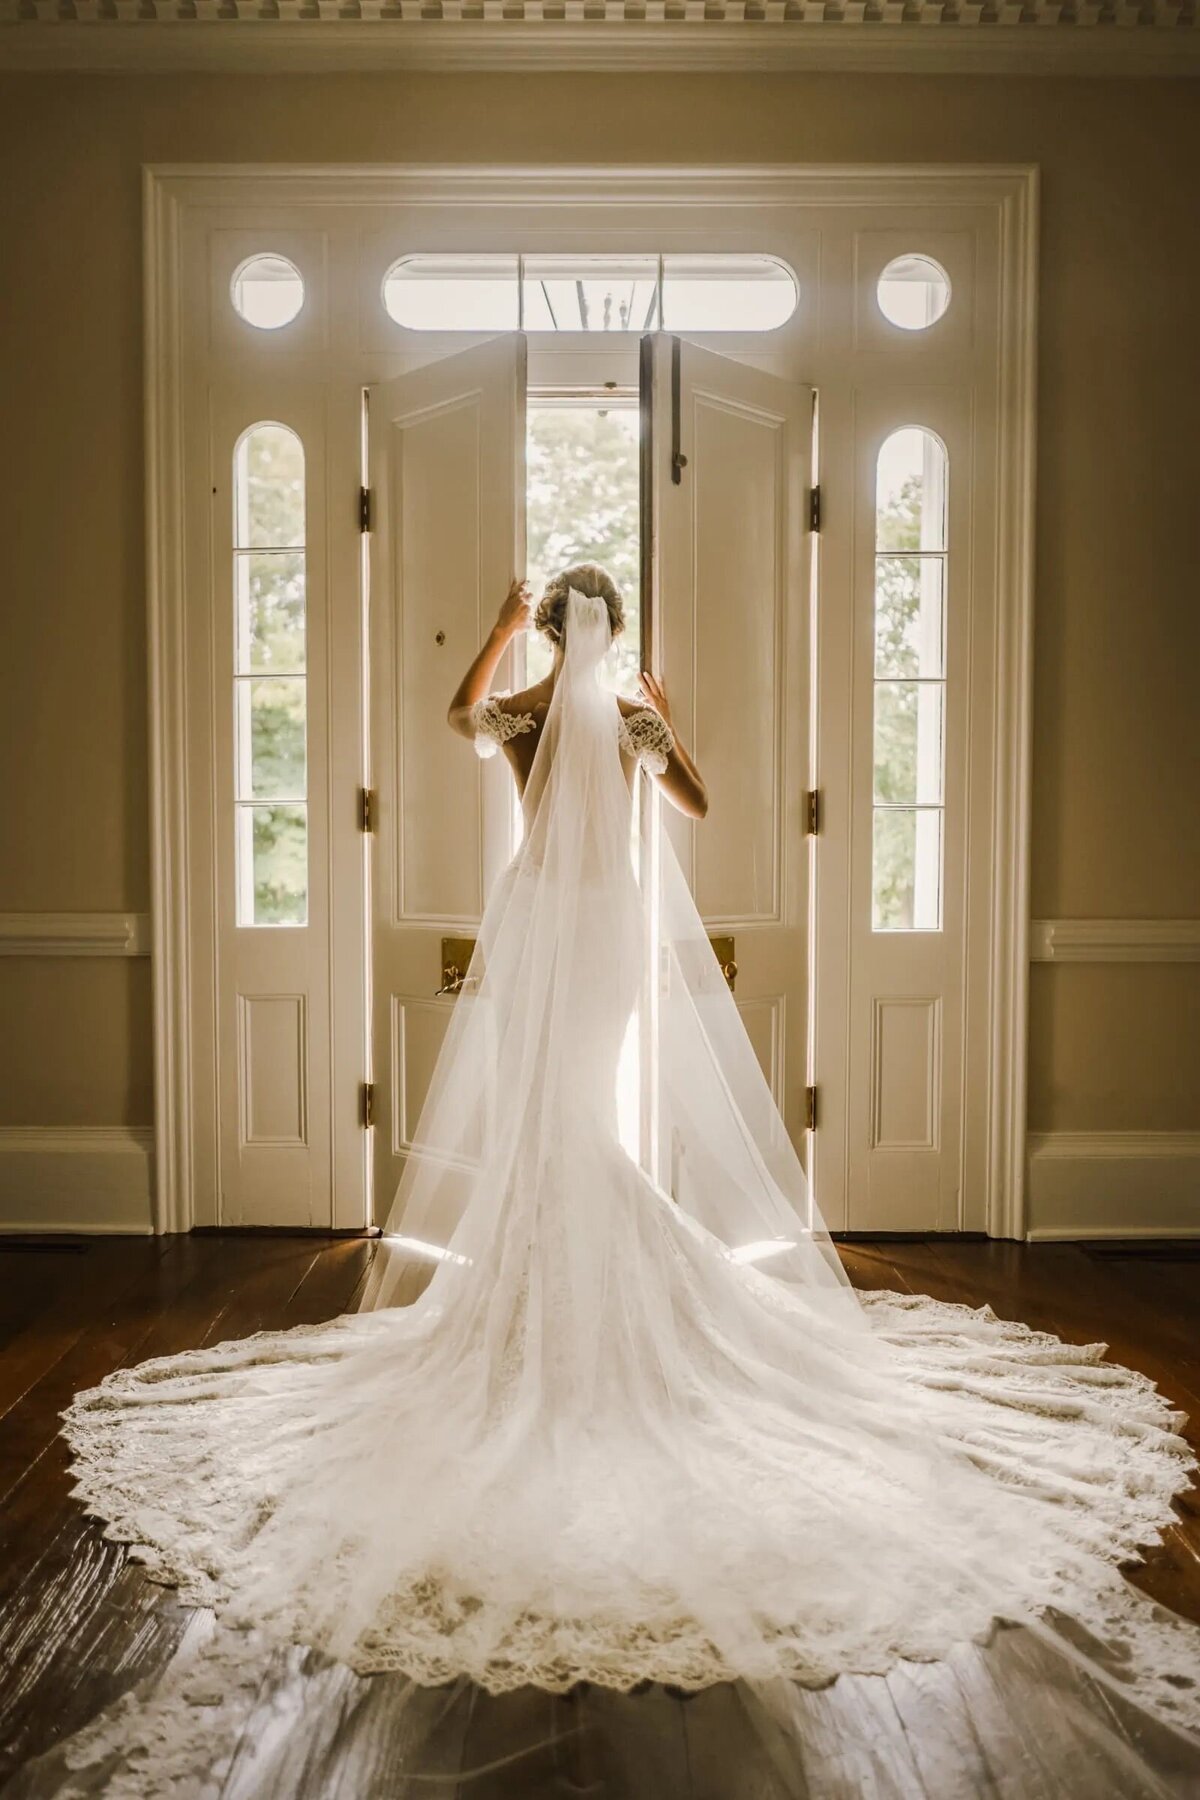 A bride illuminated by natural light from behind, her wedding dress and veil radiating